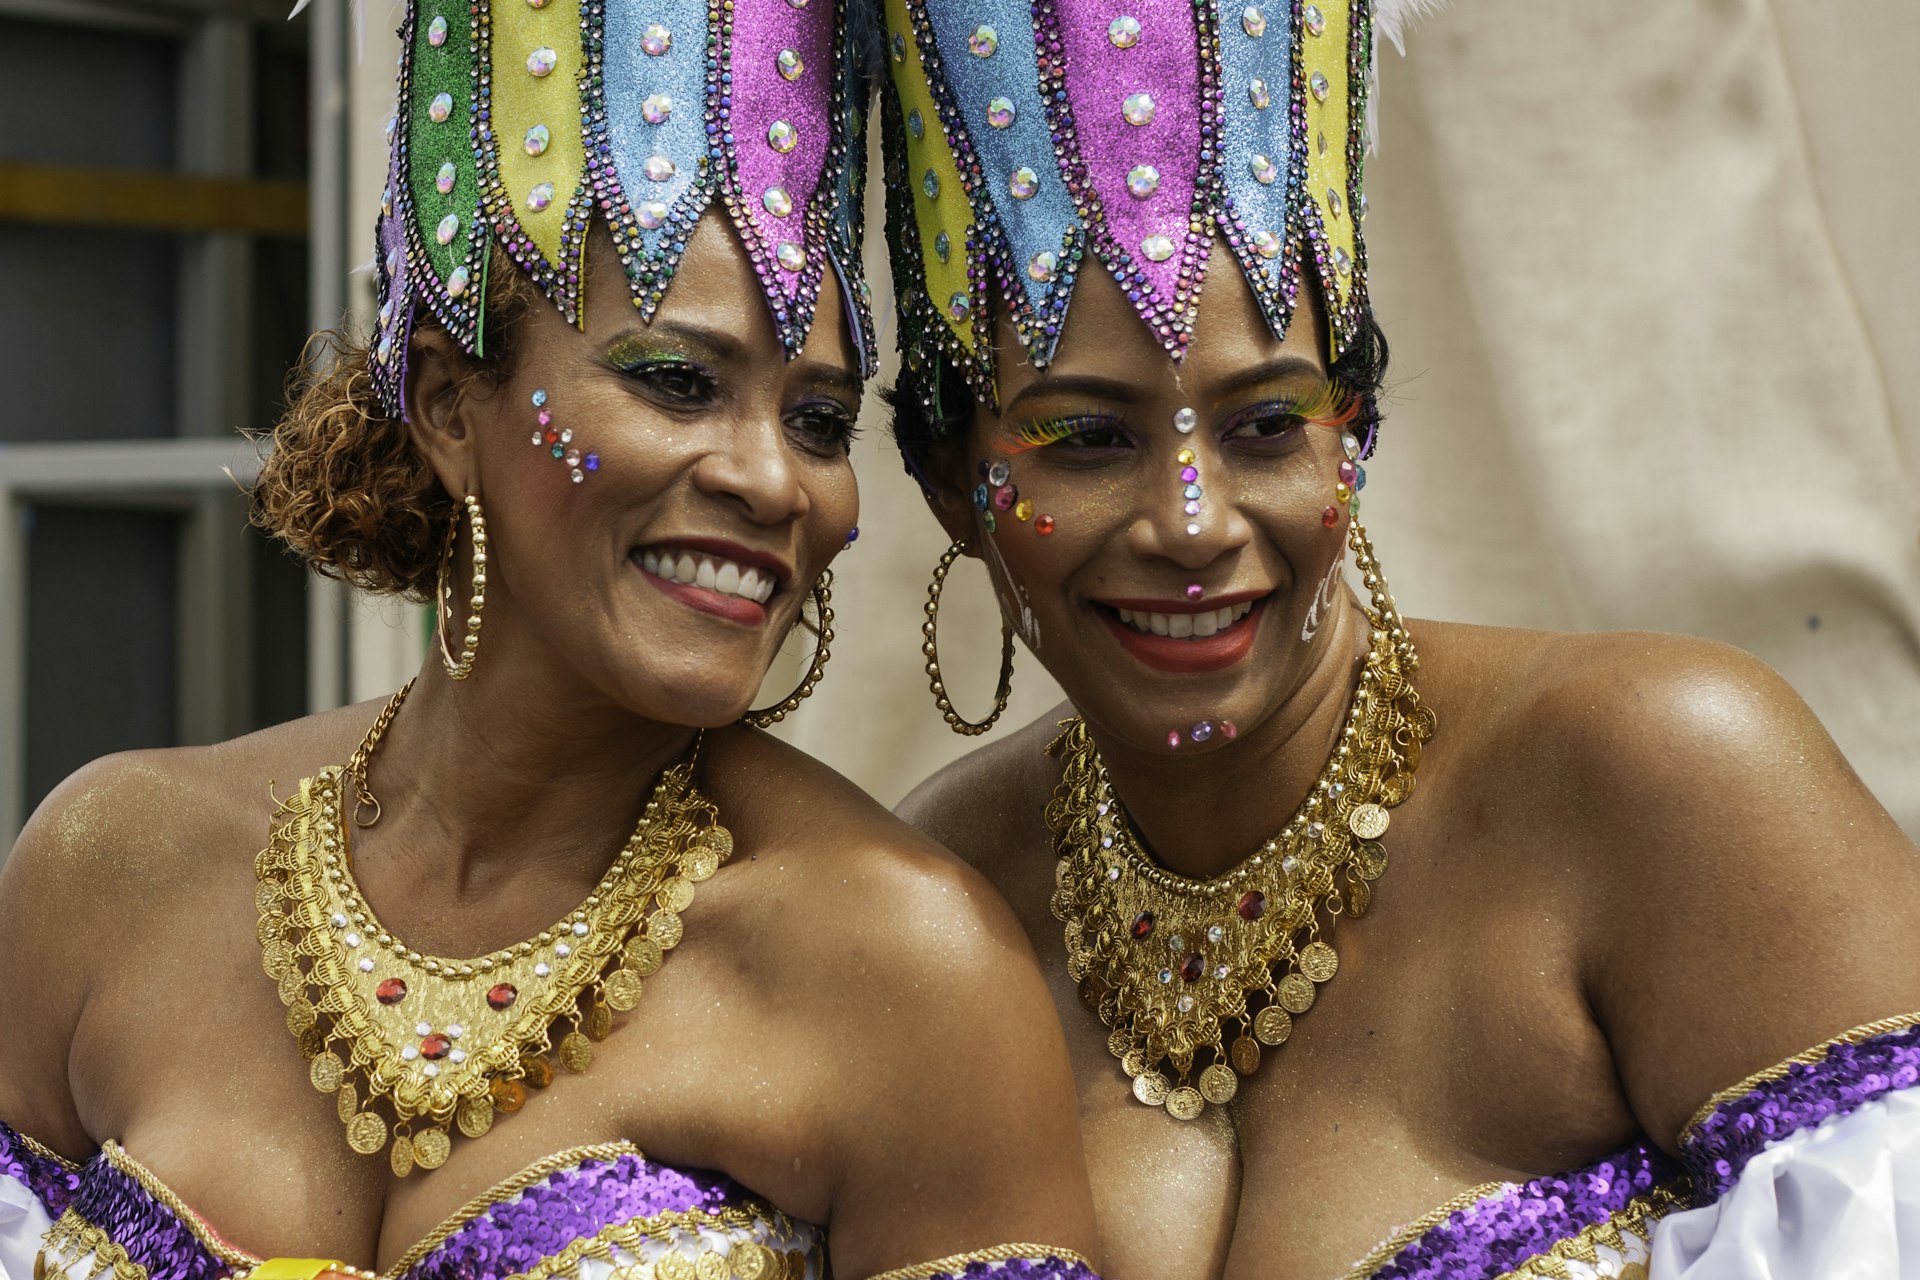 Colorfully dressed women smiling during the Carnival parade in Curaçao